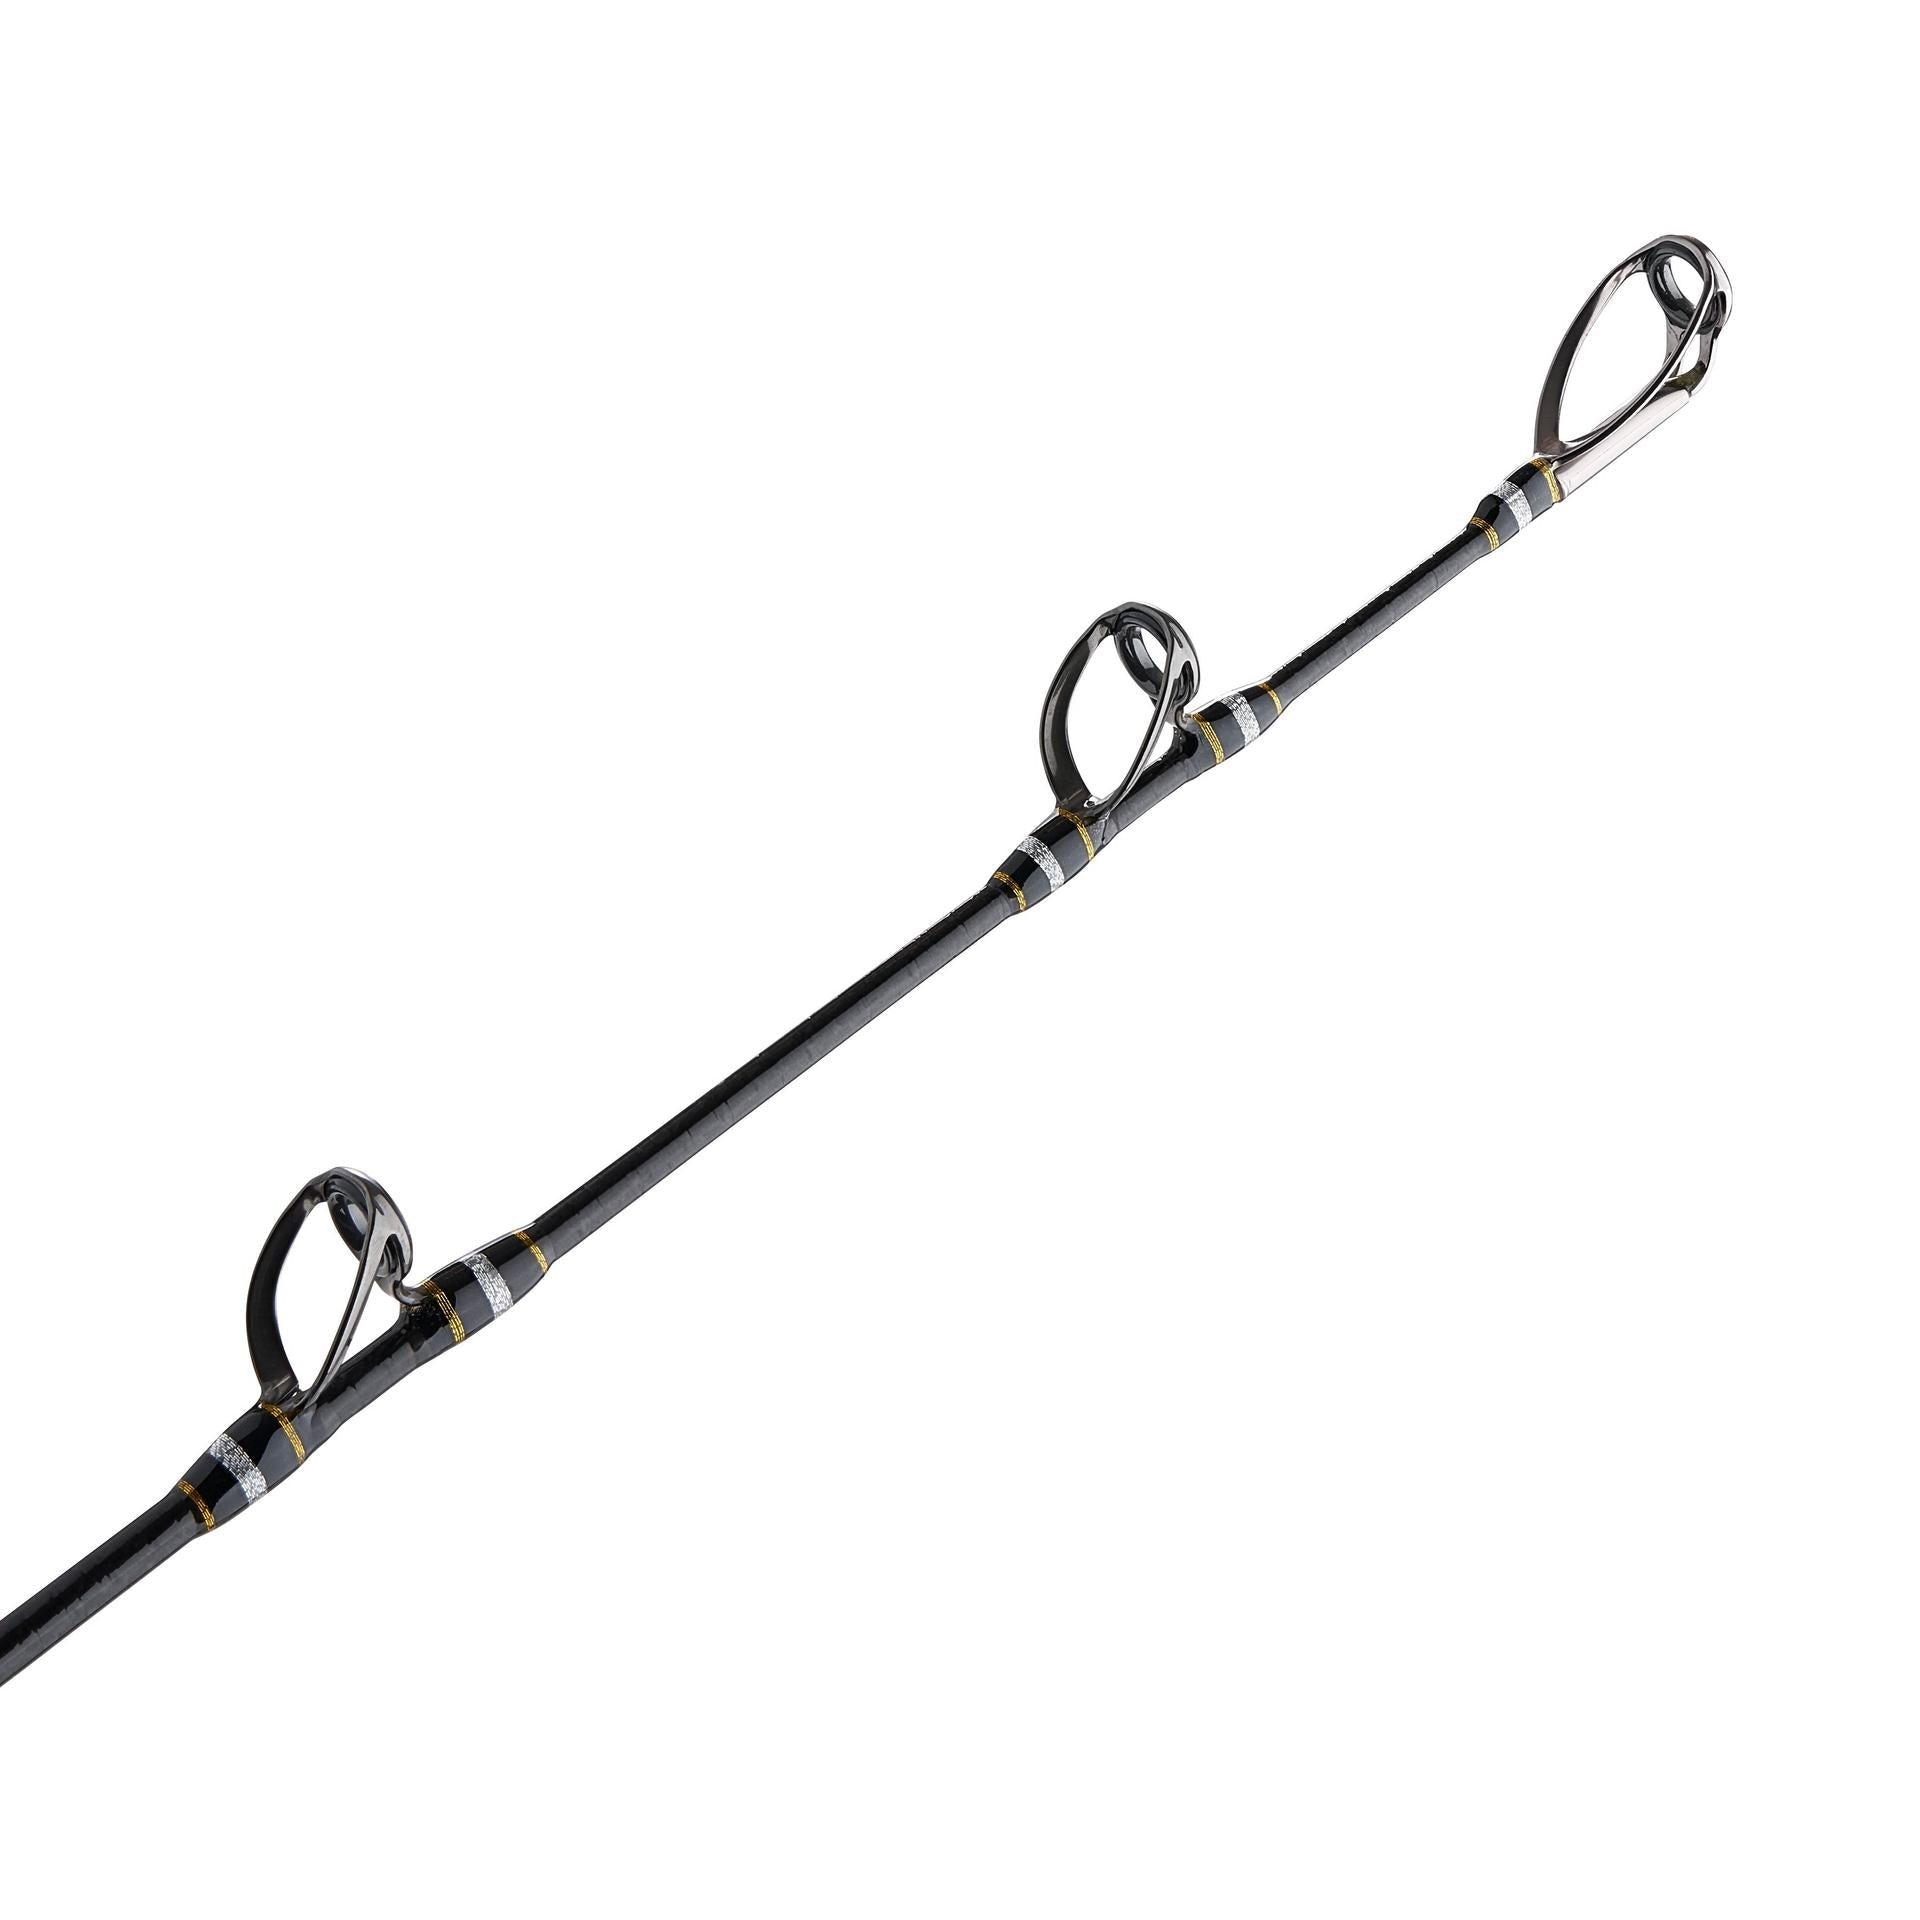 Carnage III Offshore Conventional Fishing Rod - Penn Fishing